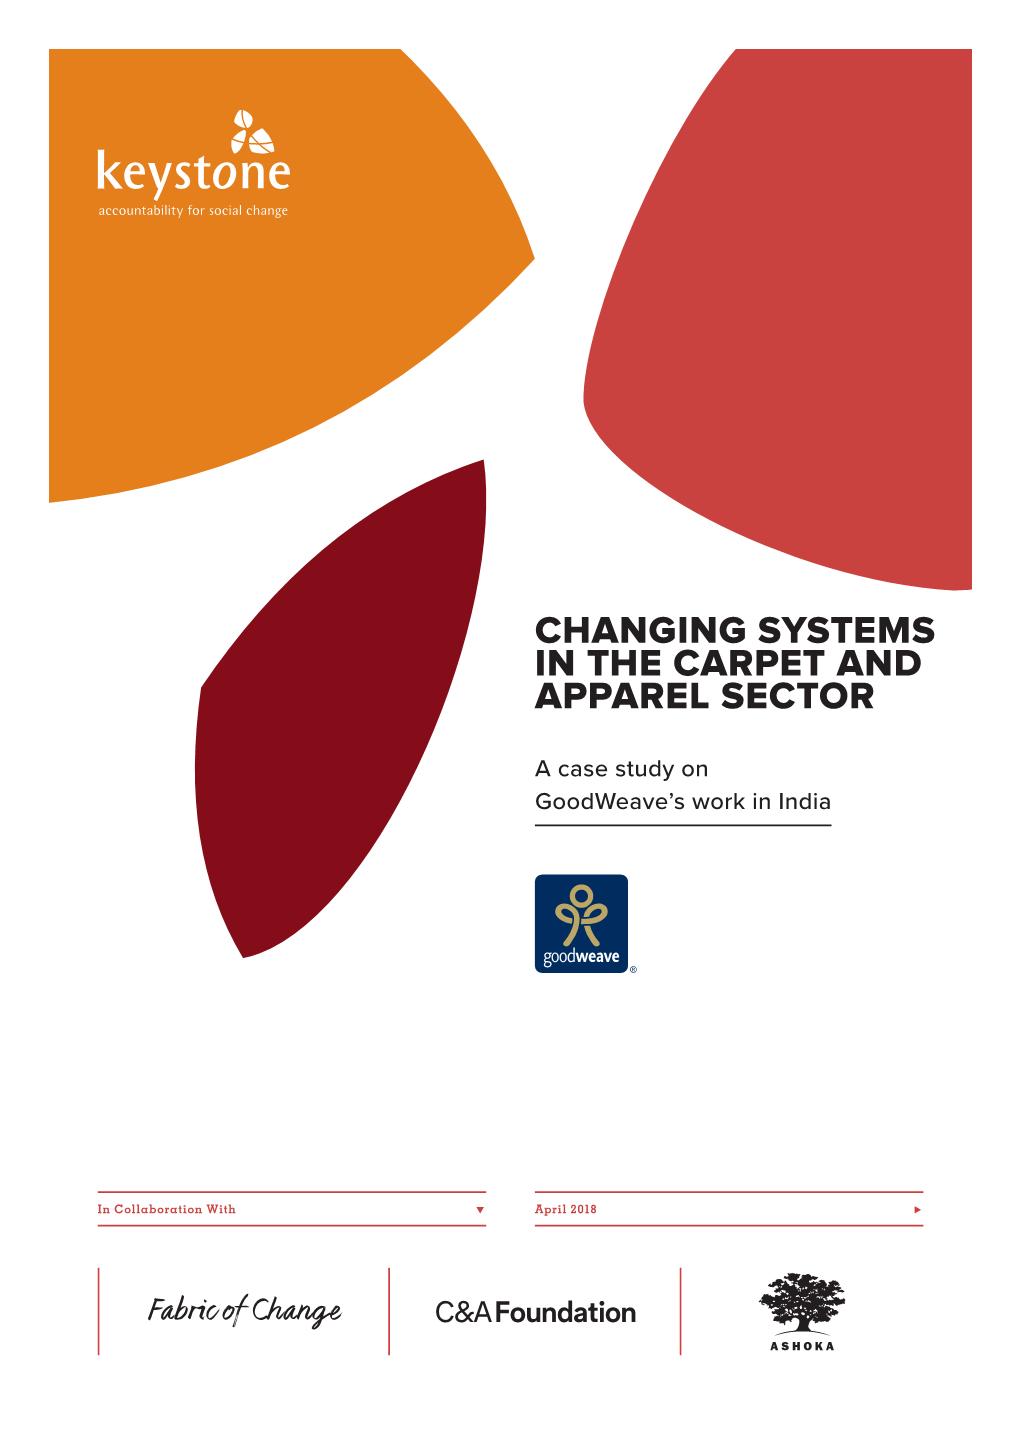 Changing Systems in the Carpet and Apparel Sector